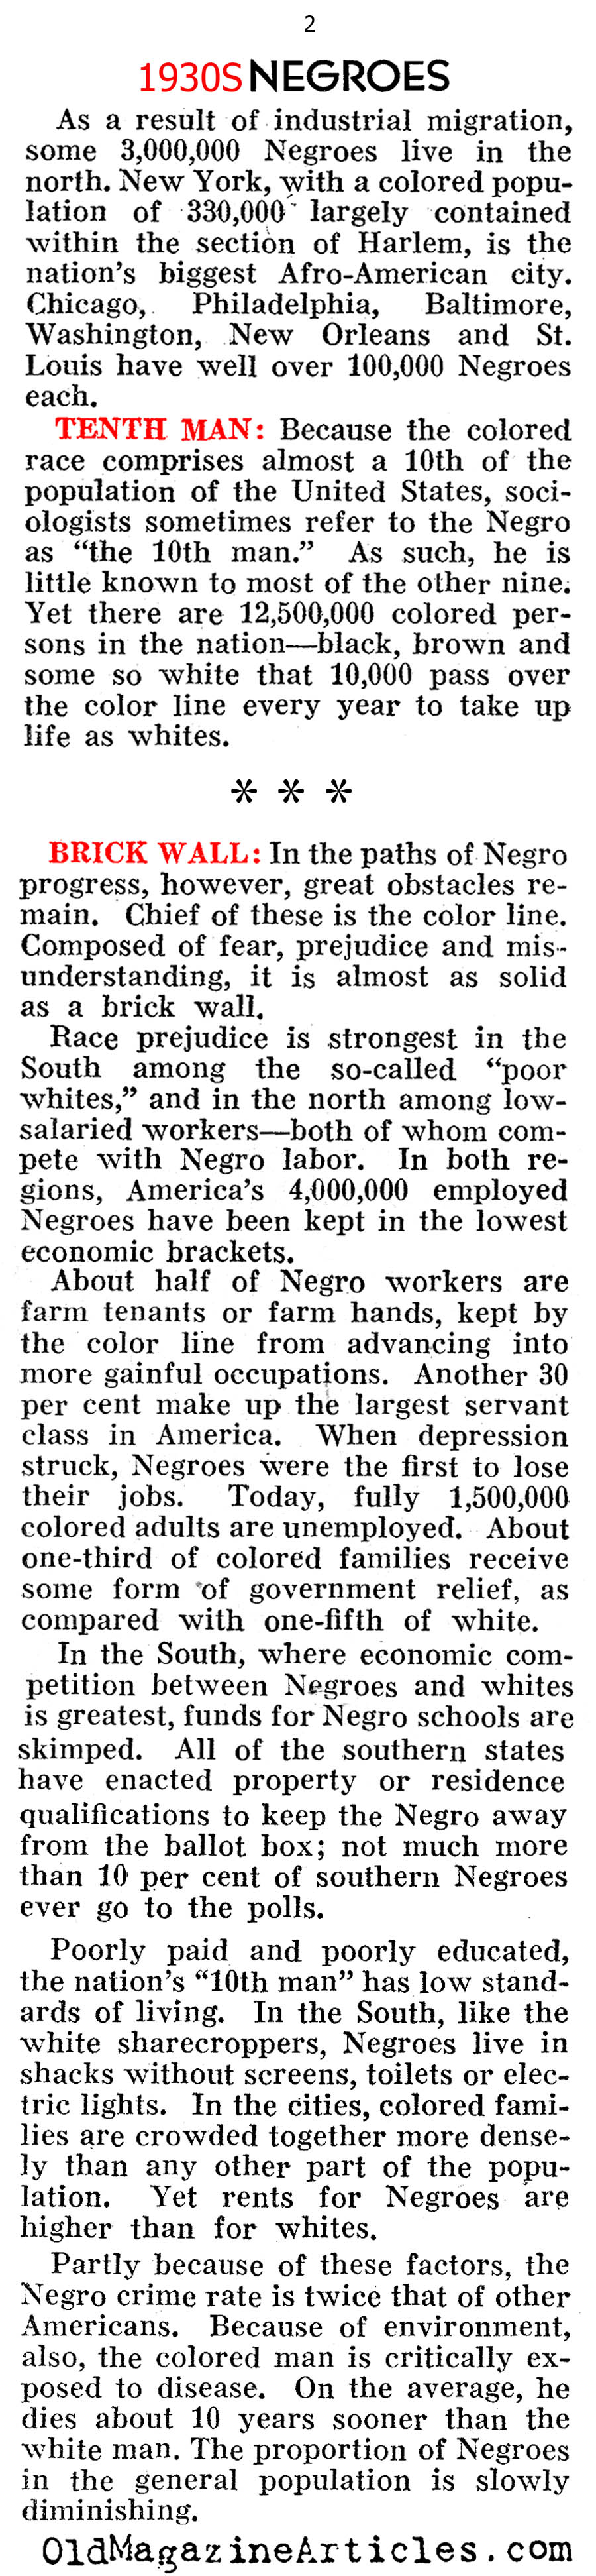 African-Americans During the Great Depression (Pathfinder Magazine, 1939)